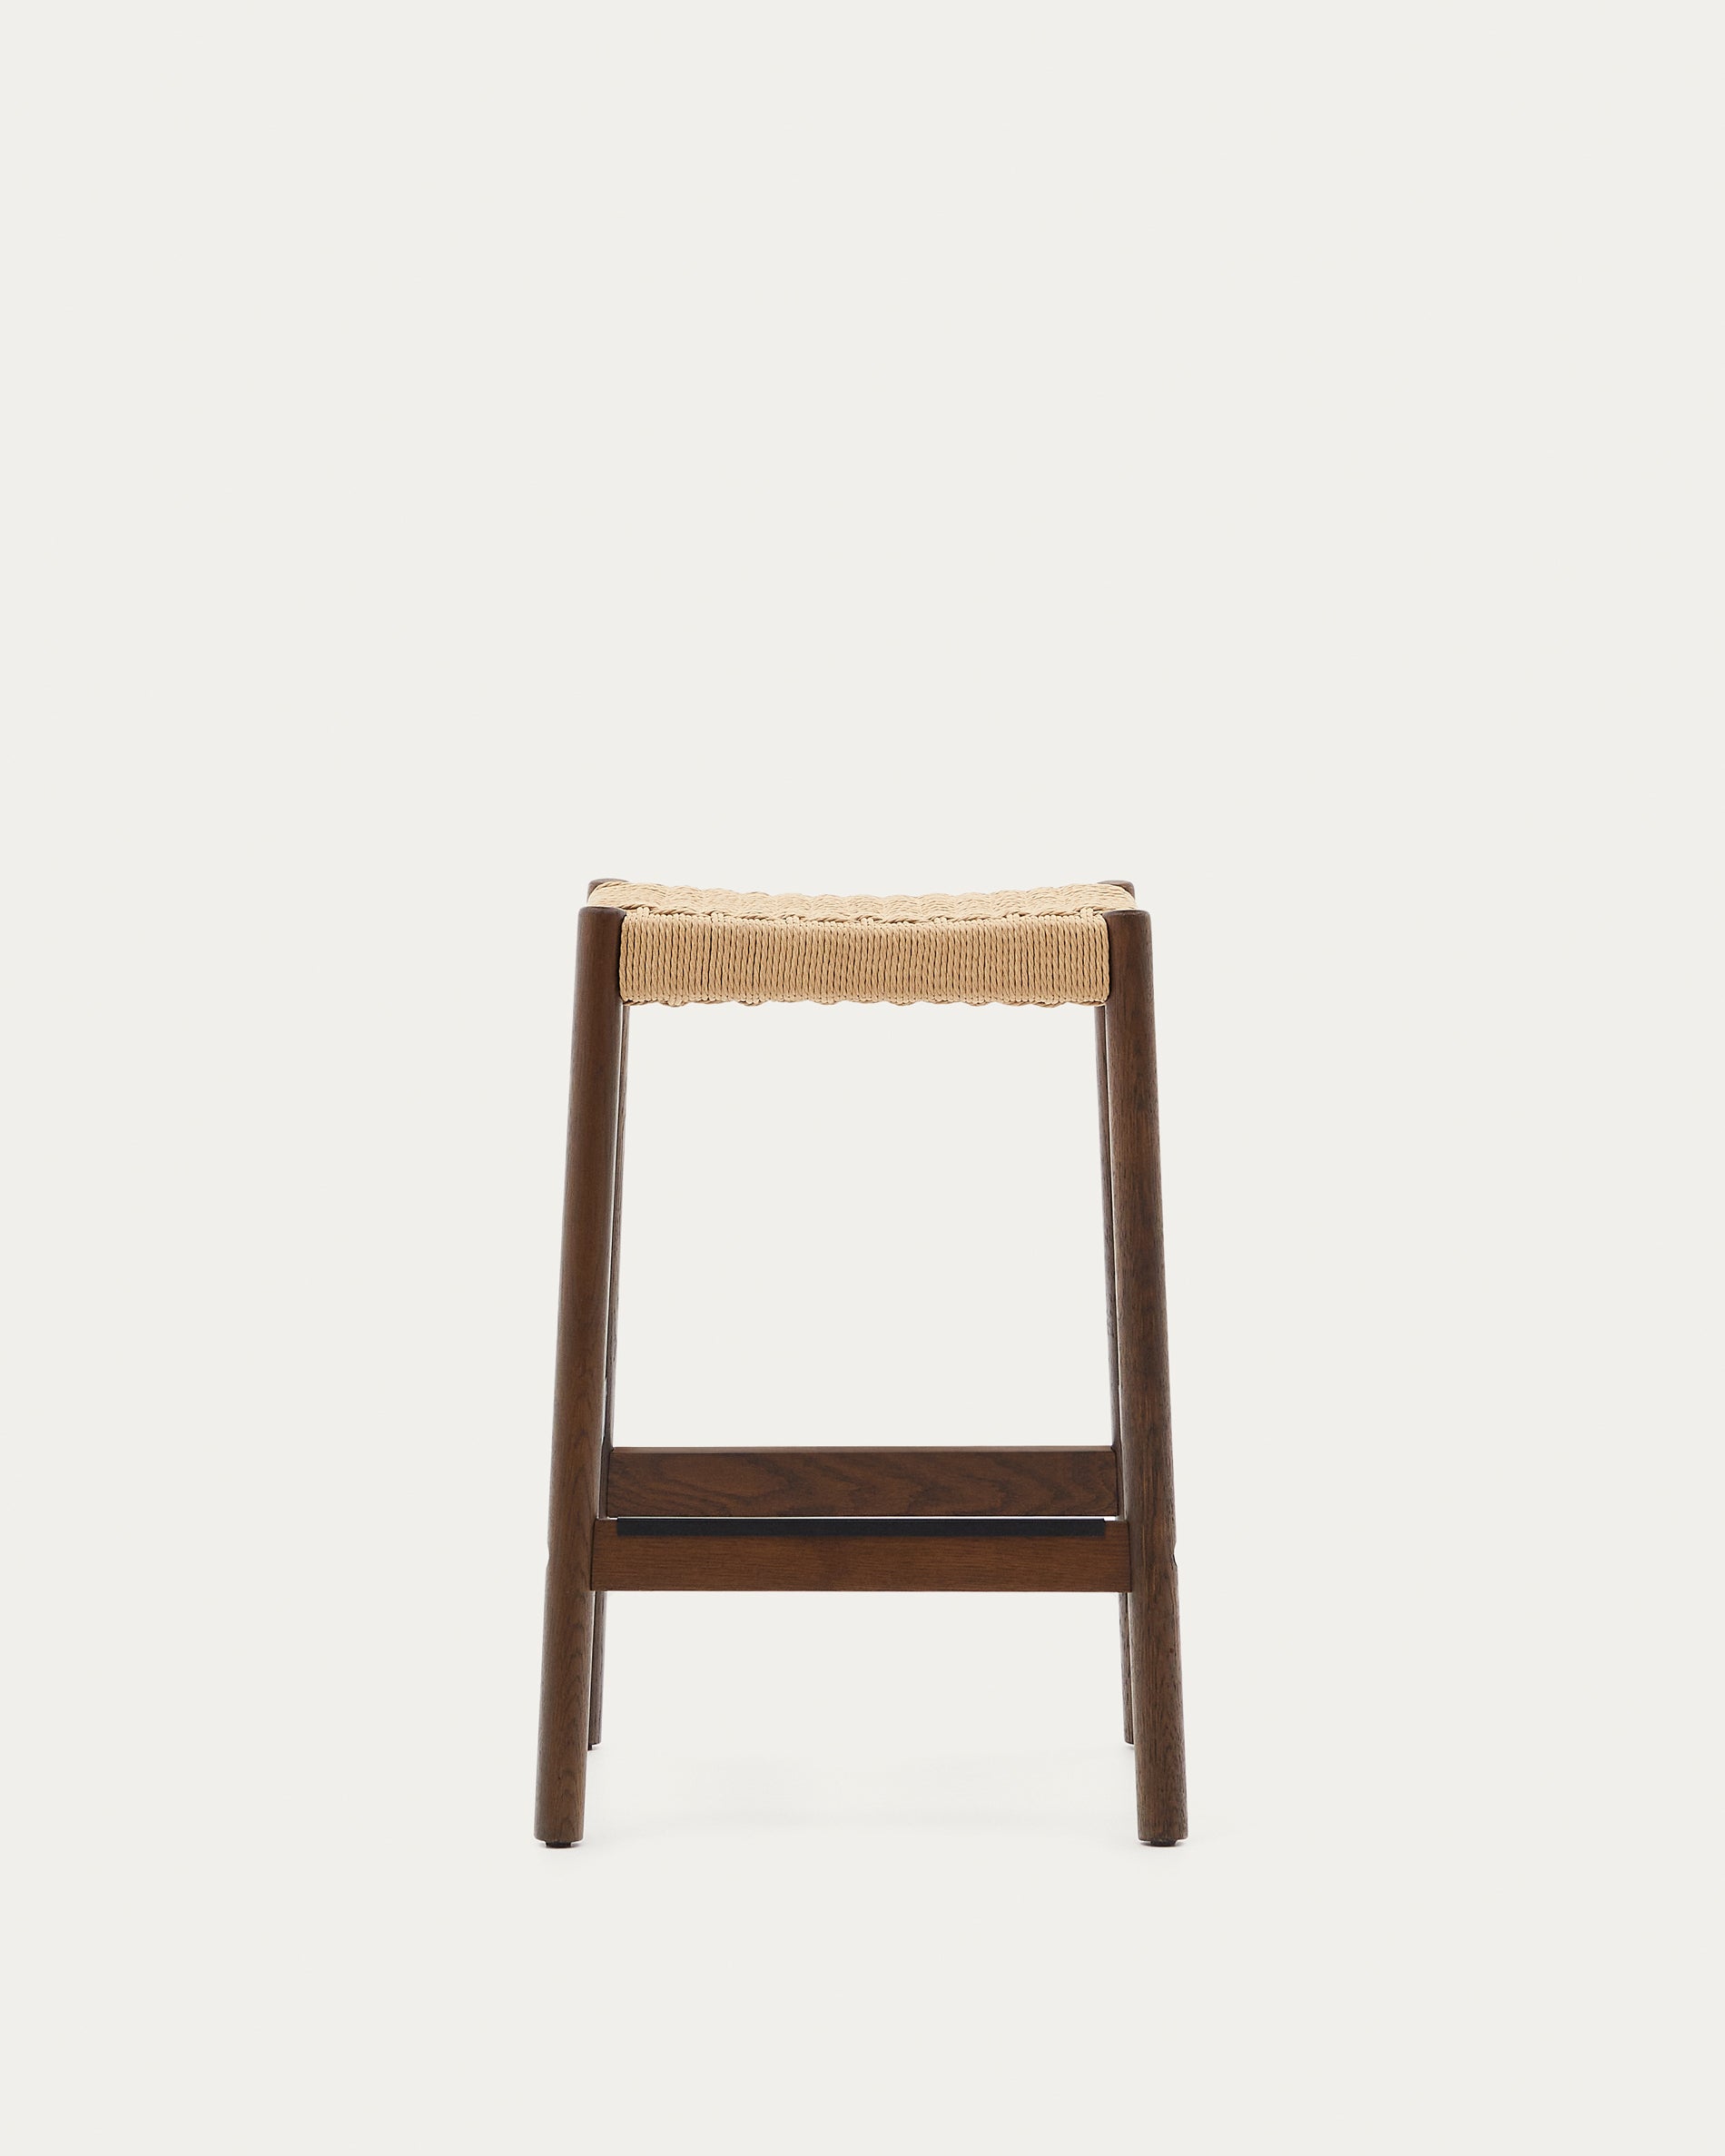 Yalia stool in solid oak with walnut finish and rope seat, height 65 cm 100% FSC